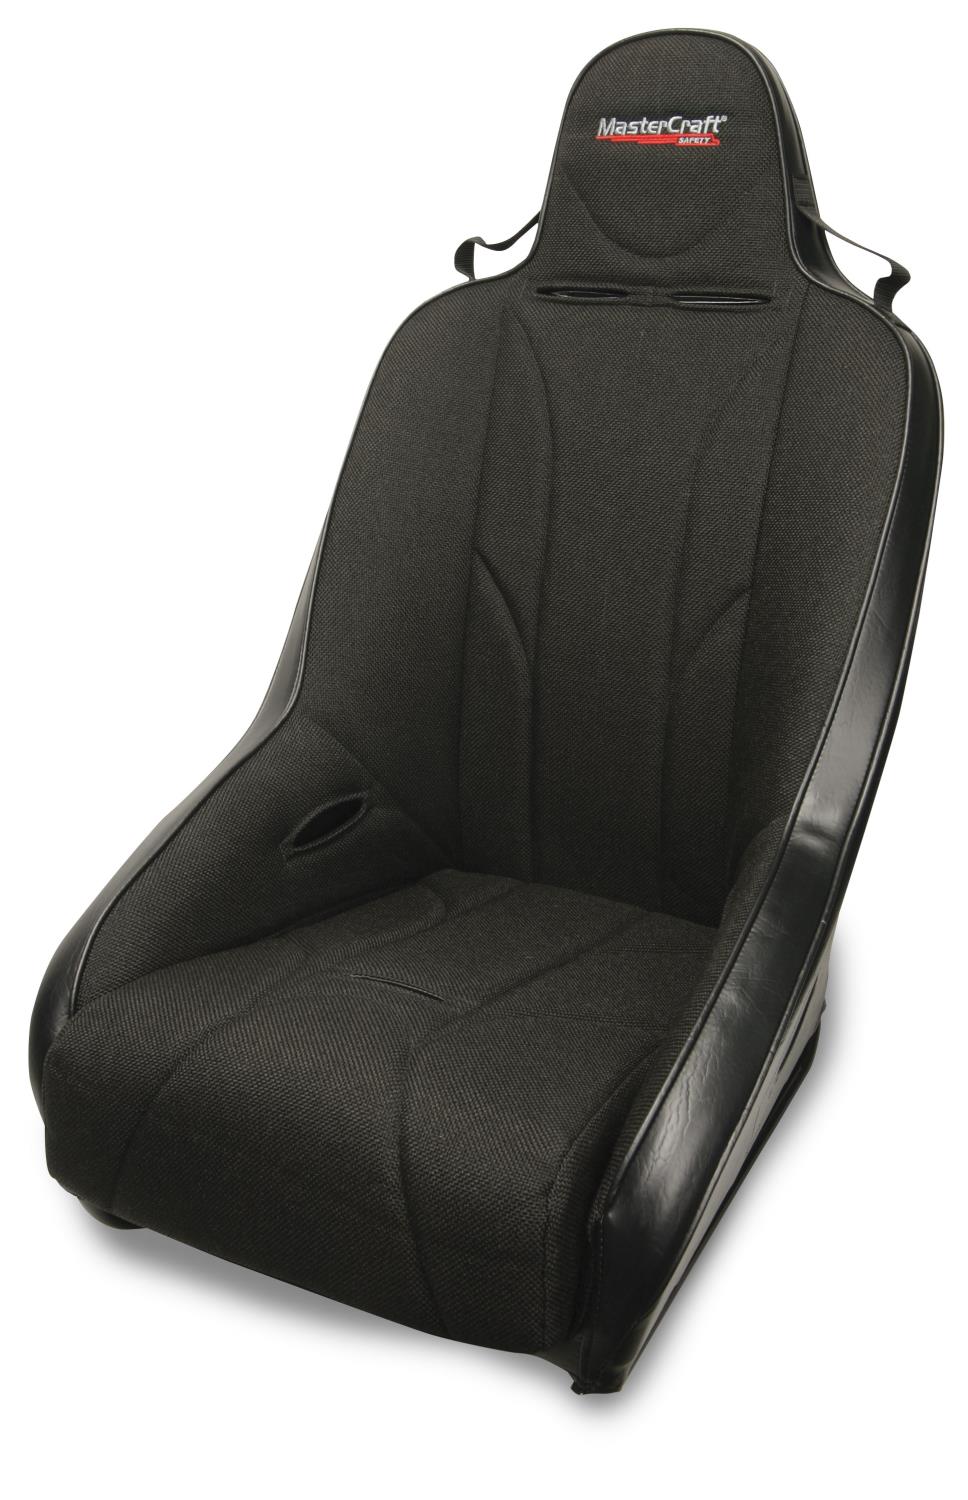 561014 Standard PROSeat w/Fixed Headrest, Black with Black Fabric Removable Cushion, Black Side Panels, Black Band w/BRS Stitch